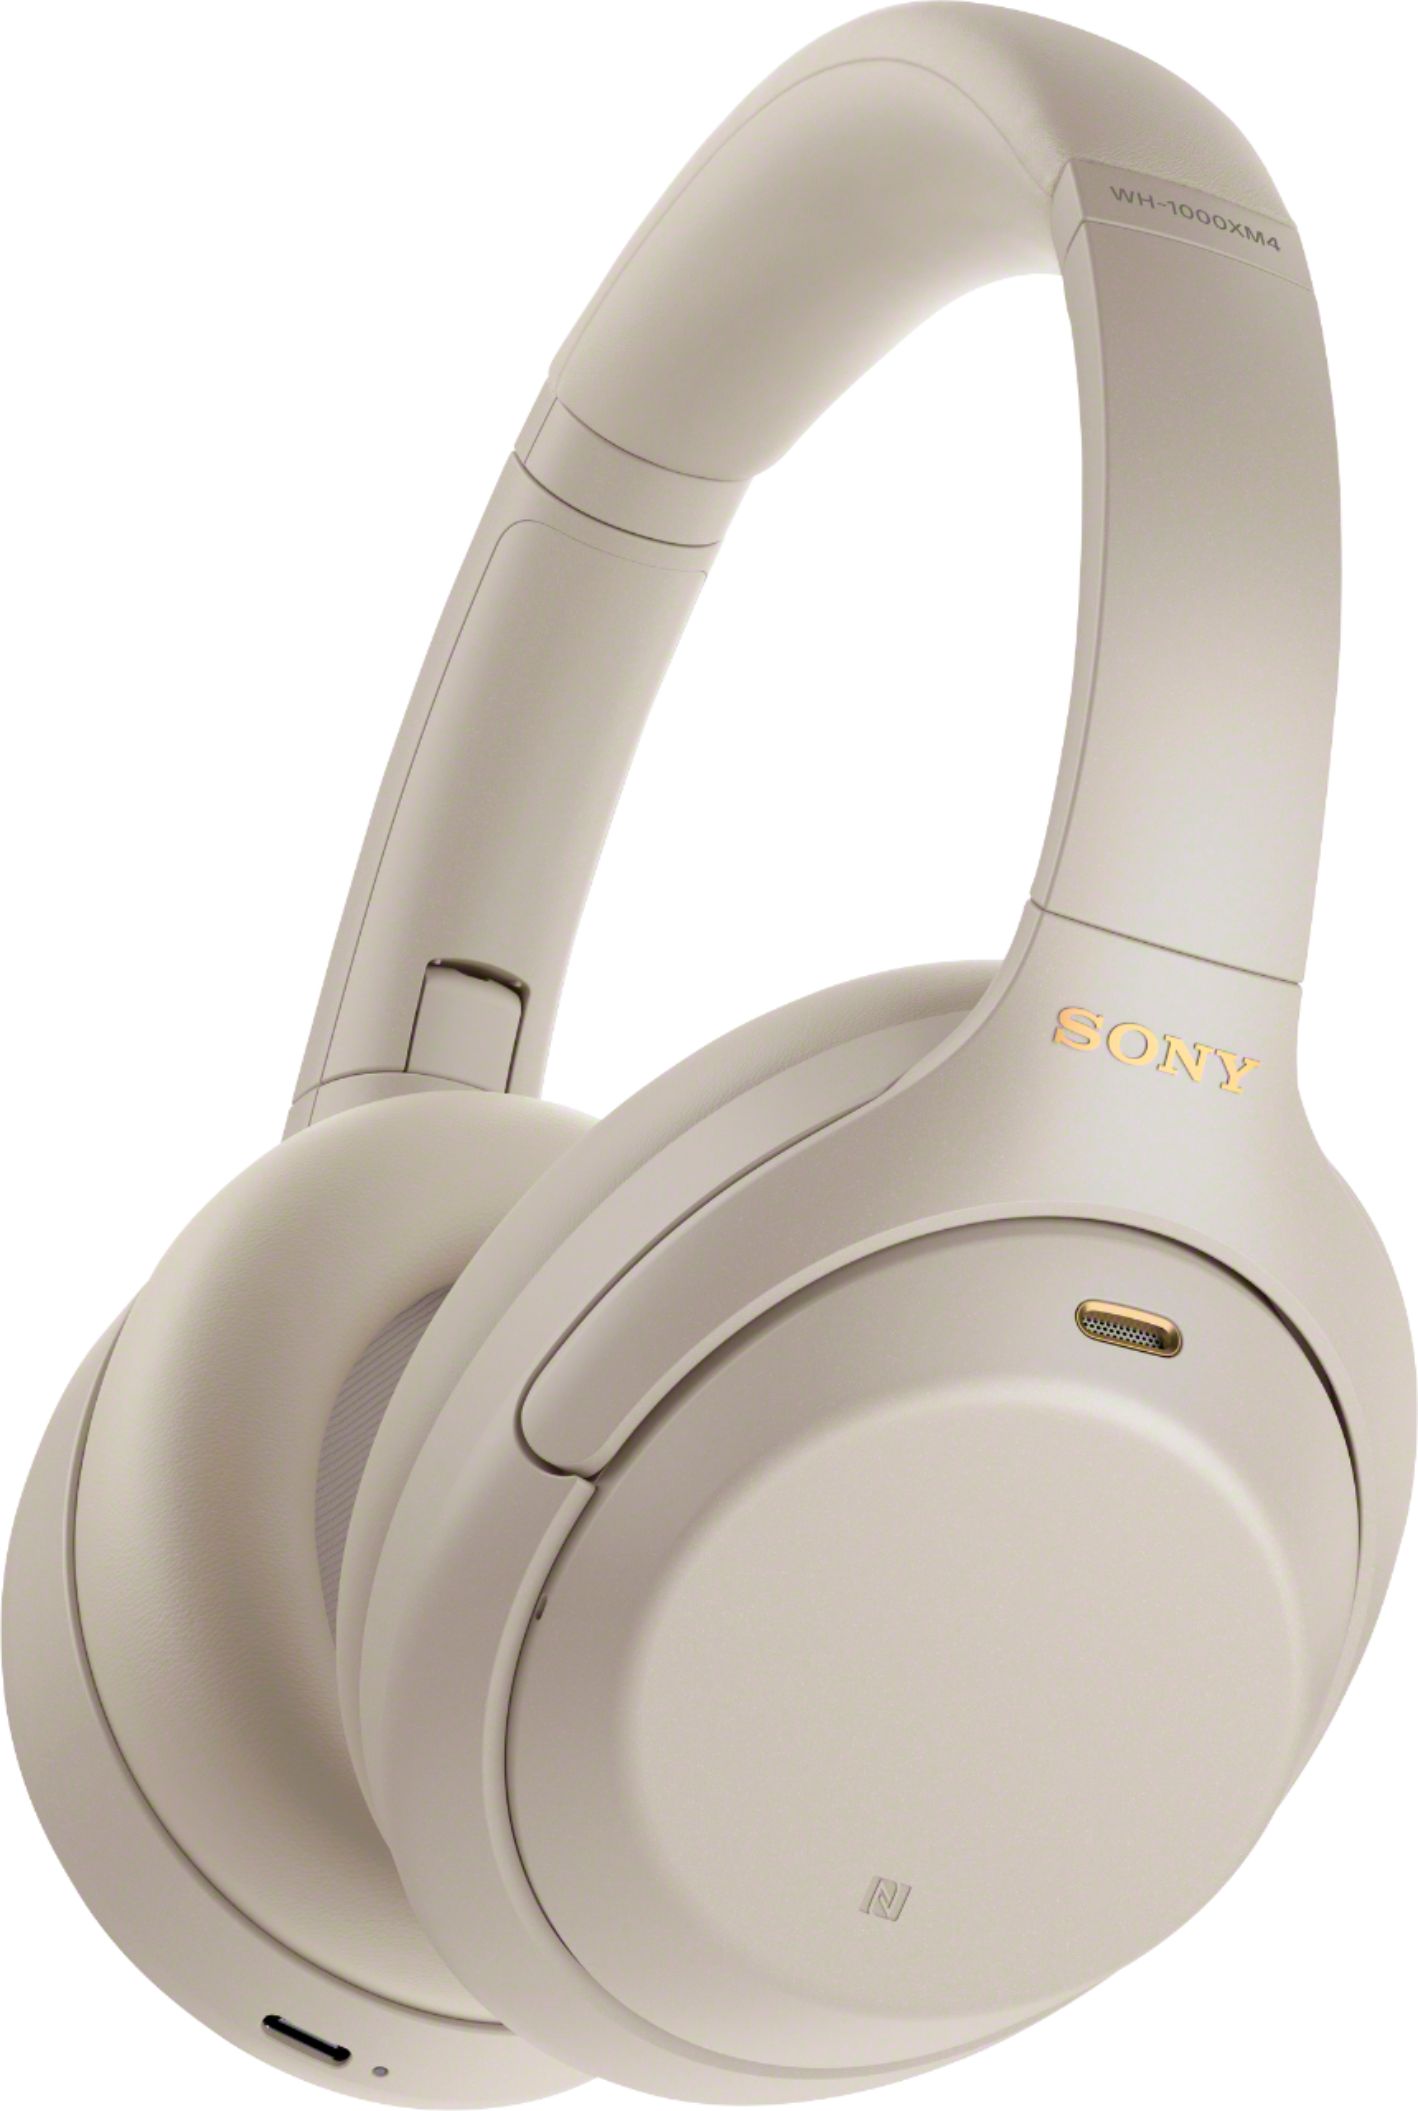 Sony WH1000XM4 Wireless Noise-Cancelling Over-the-Ear